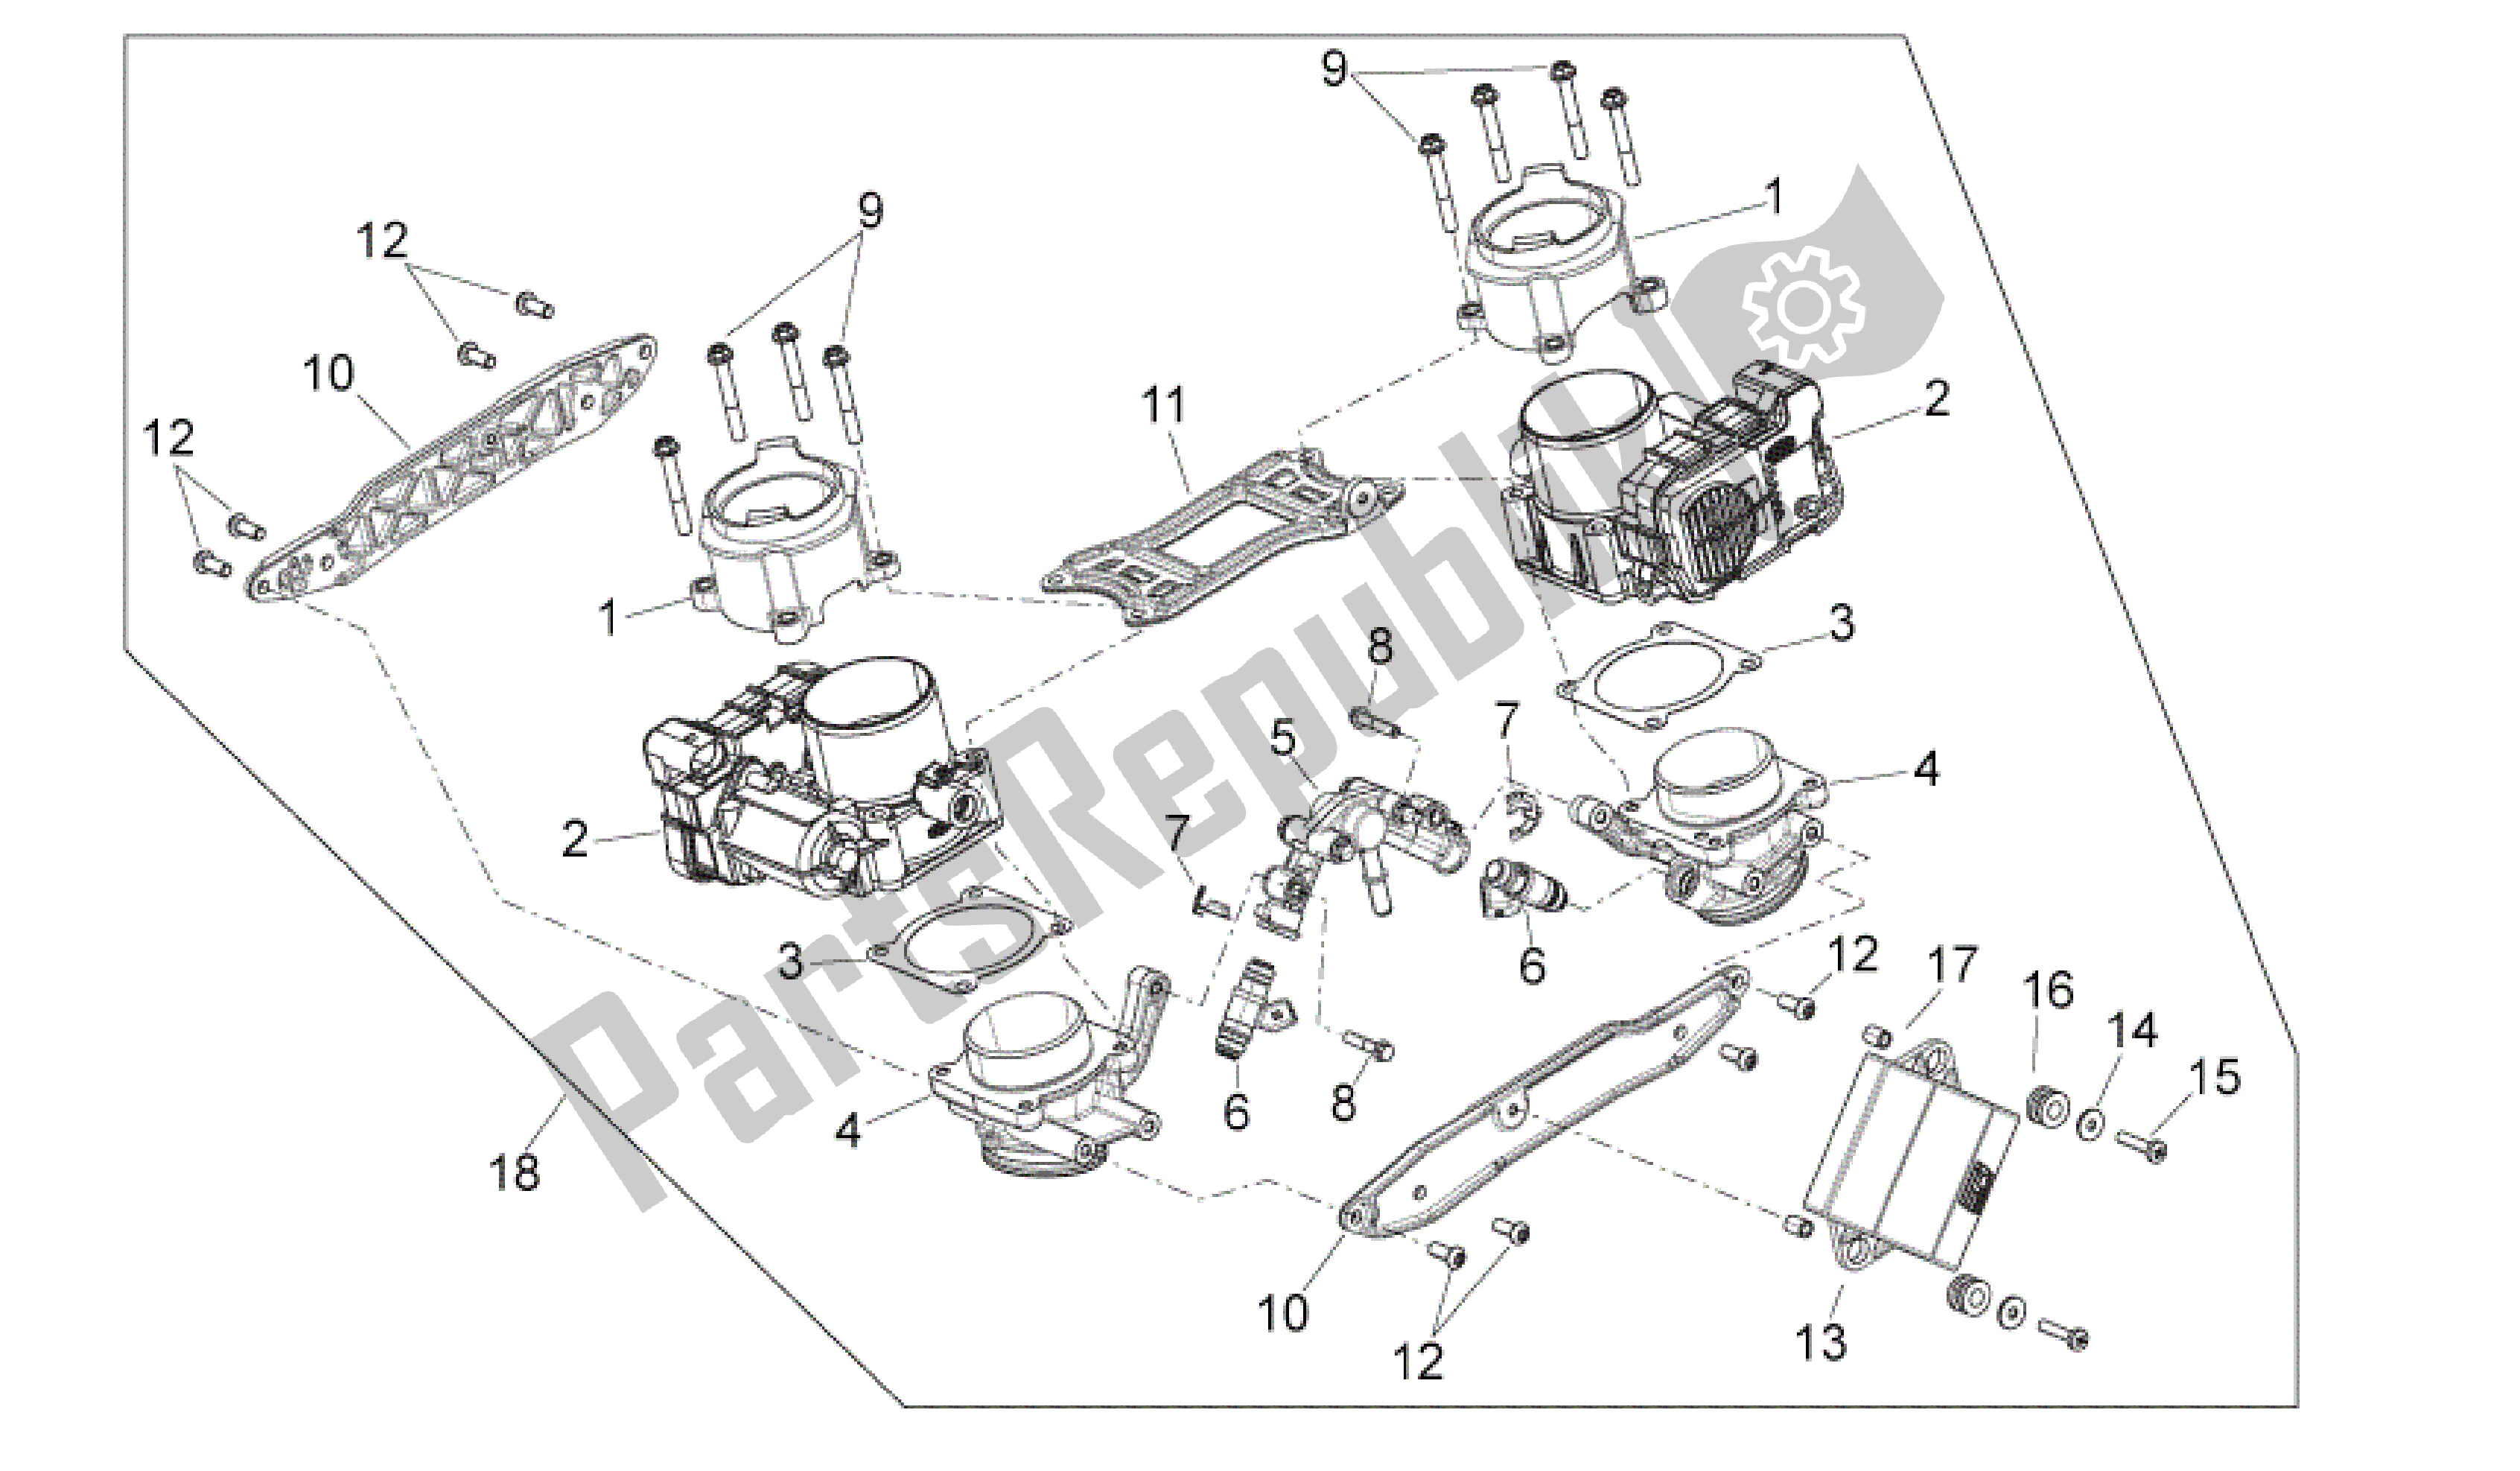 All parts for the Throttle Body of the Aprilia Shiver 750 2011 - 2013